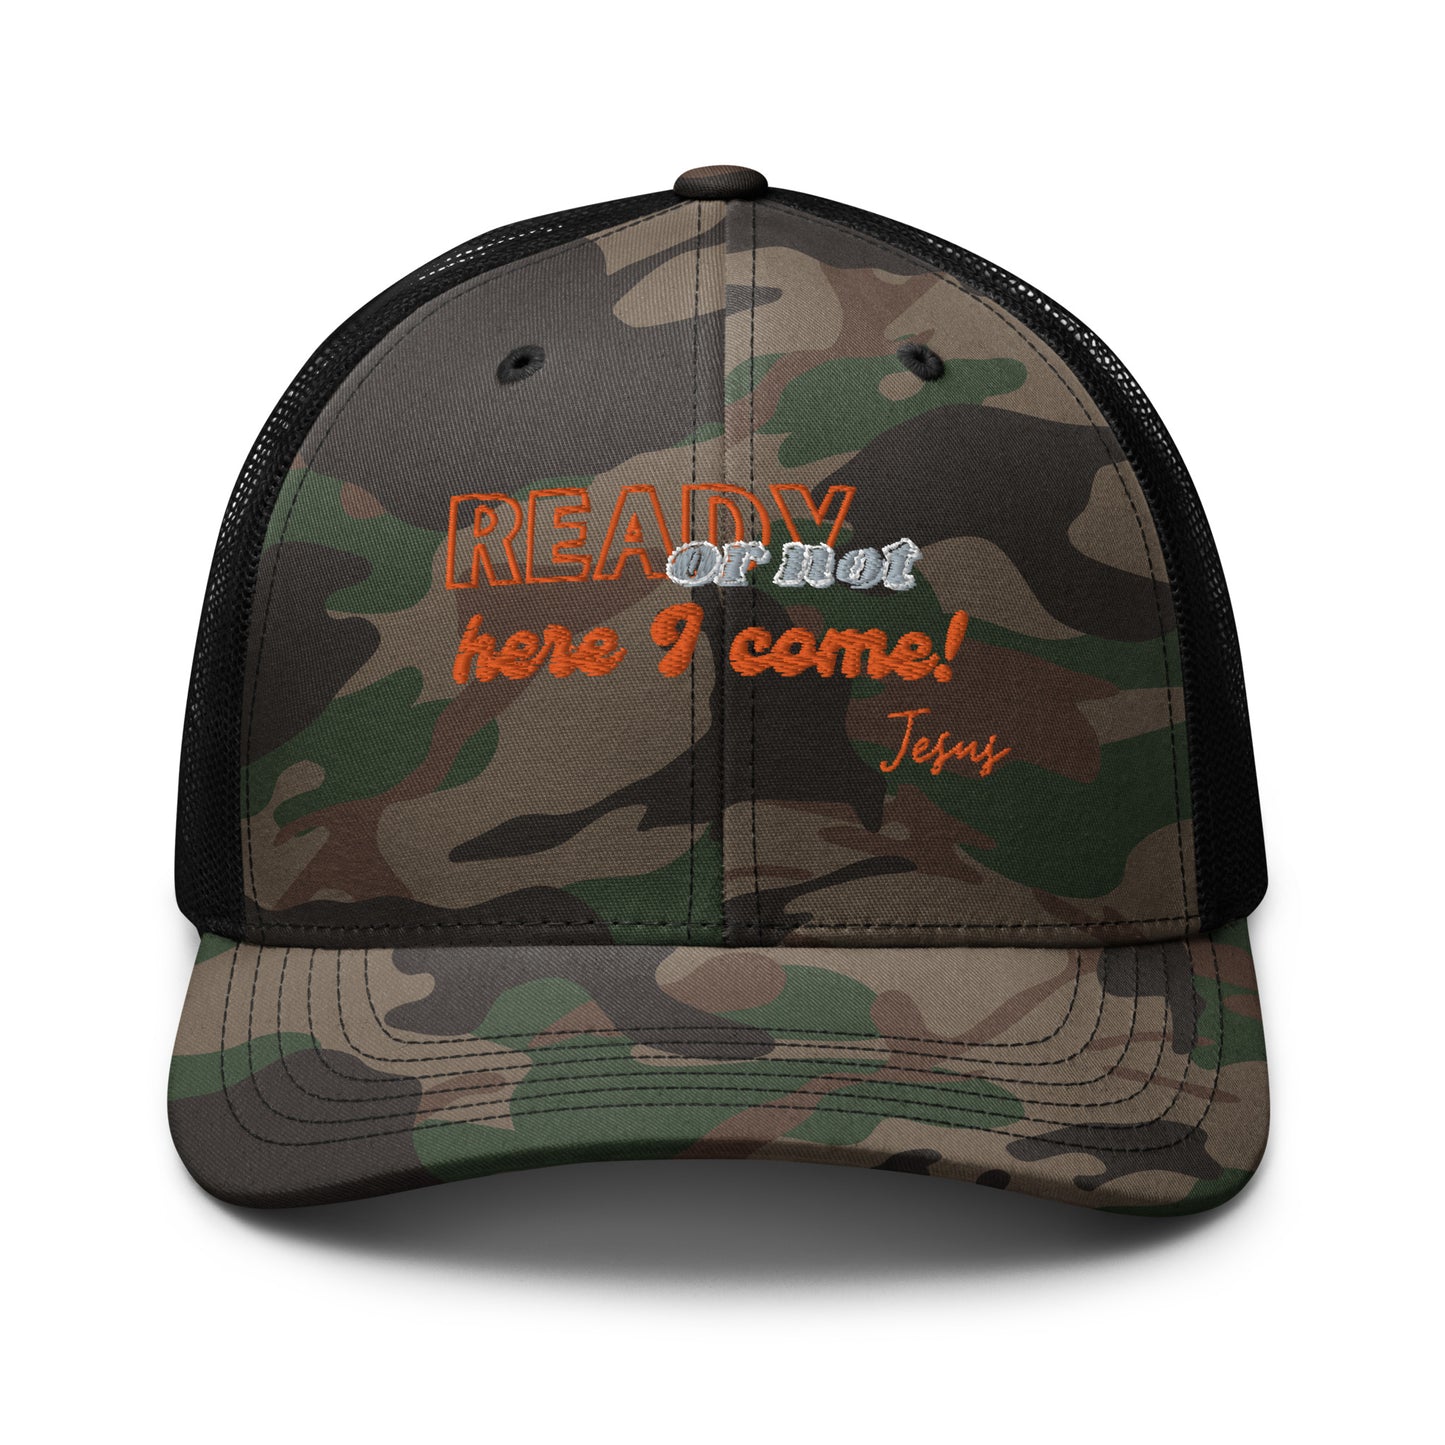 Ready or not Camouflage trucker hat